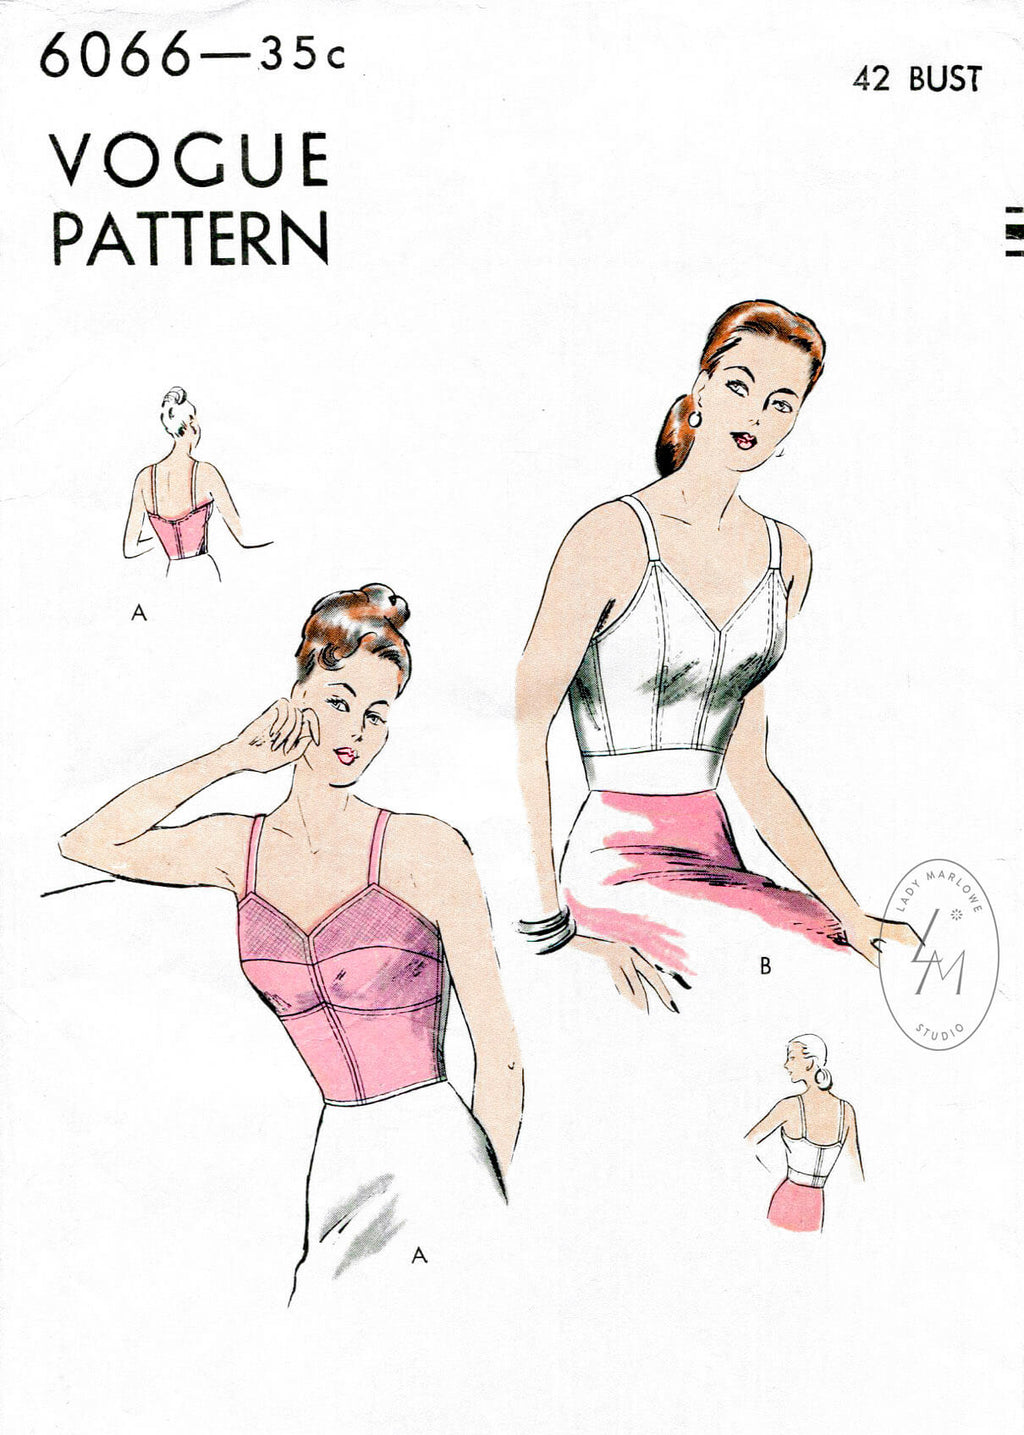 1940s vintage bra lingerie sewing pattern reproduction – Lady Marlowe